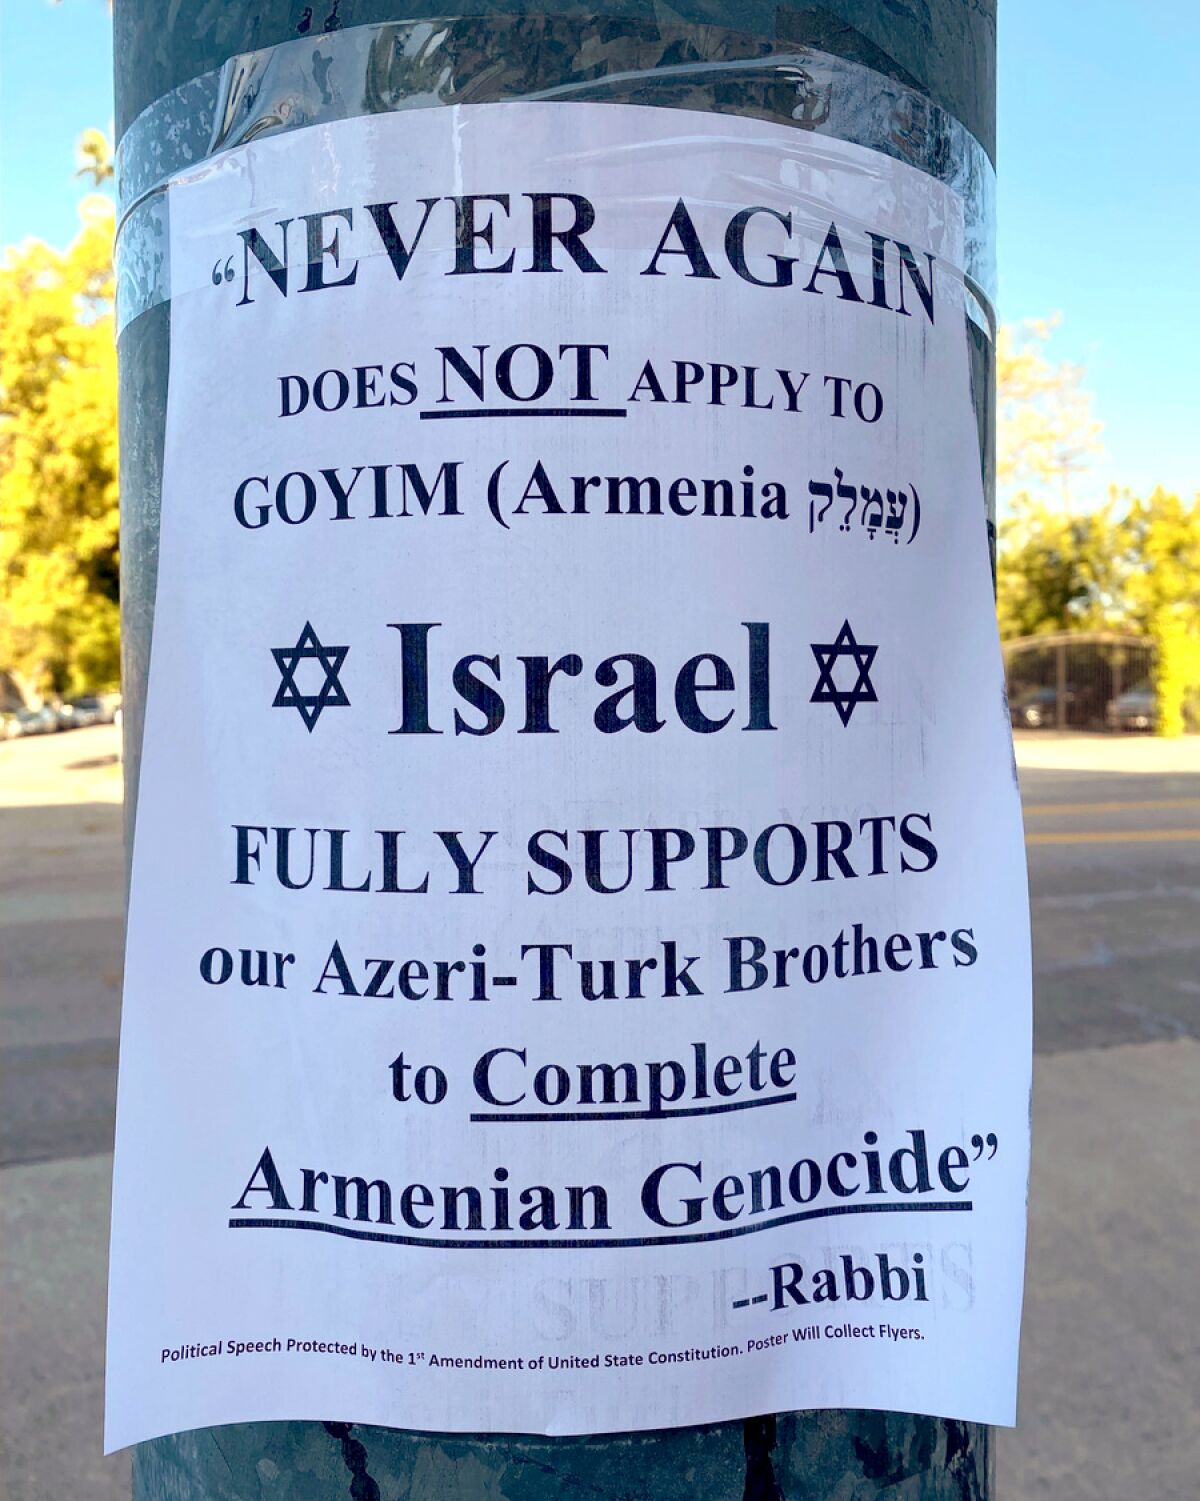 A flier: "Never Again. Does not apply to Goyim. Israel fully supports our Azeri-Turk brothers to complete Armenian Genocide"